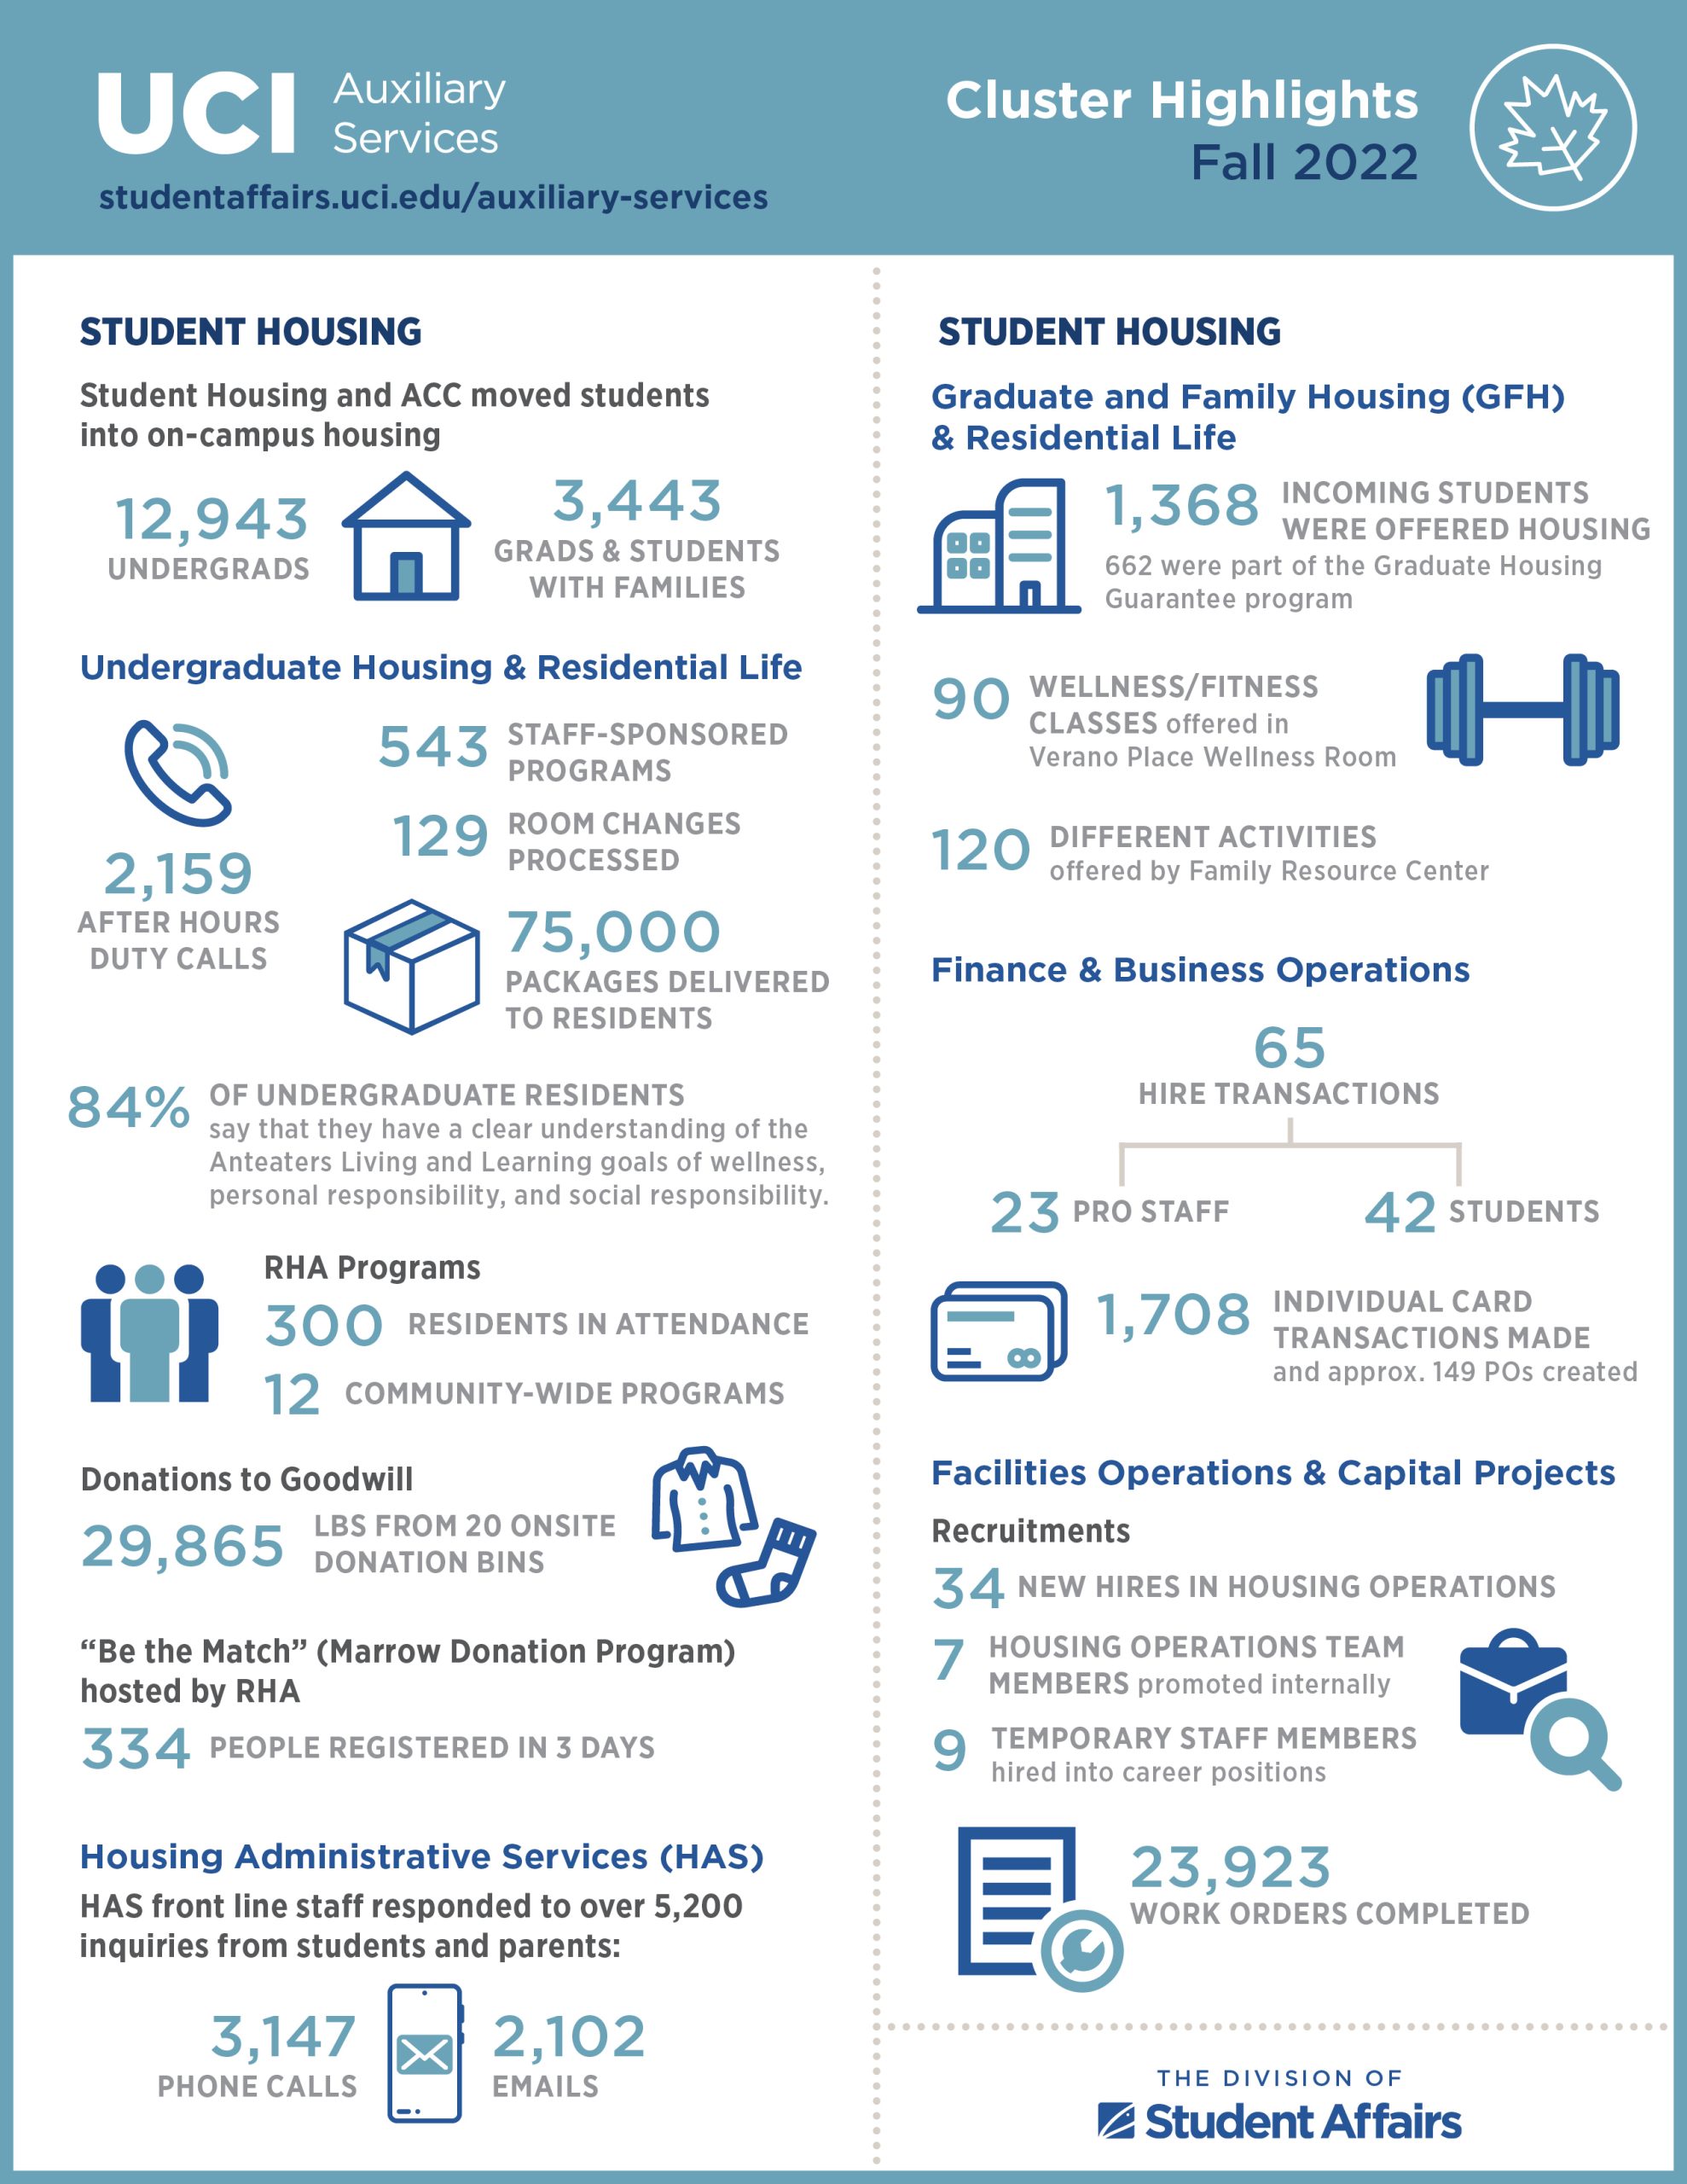 Student Affairs Auxiliary Services Fall 2022 Cluster Highlights